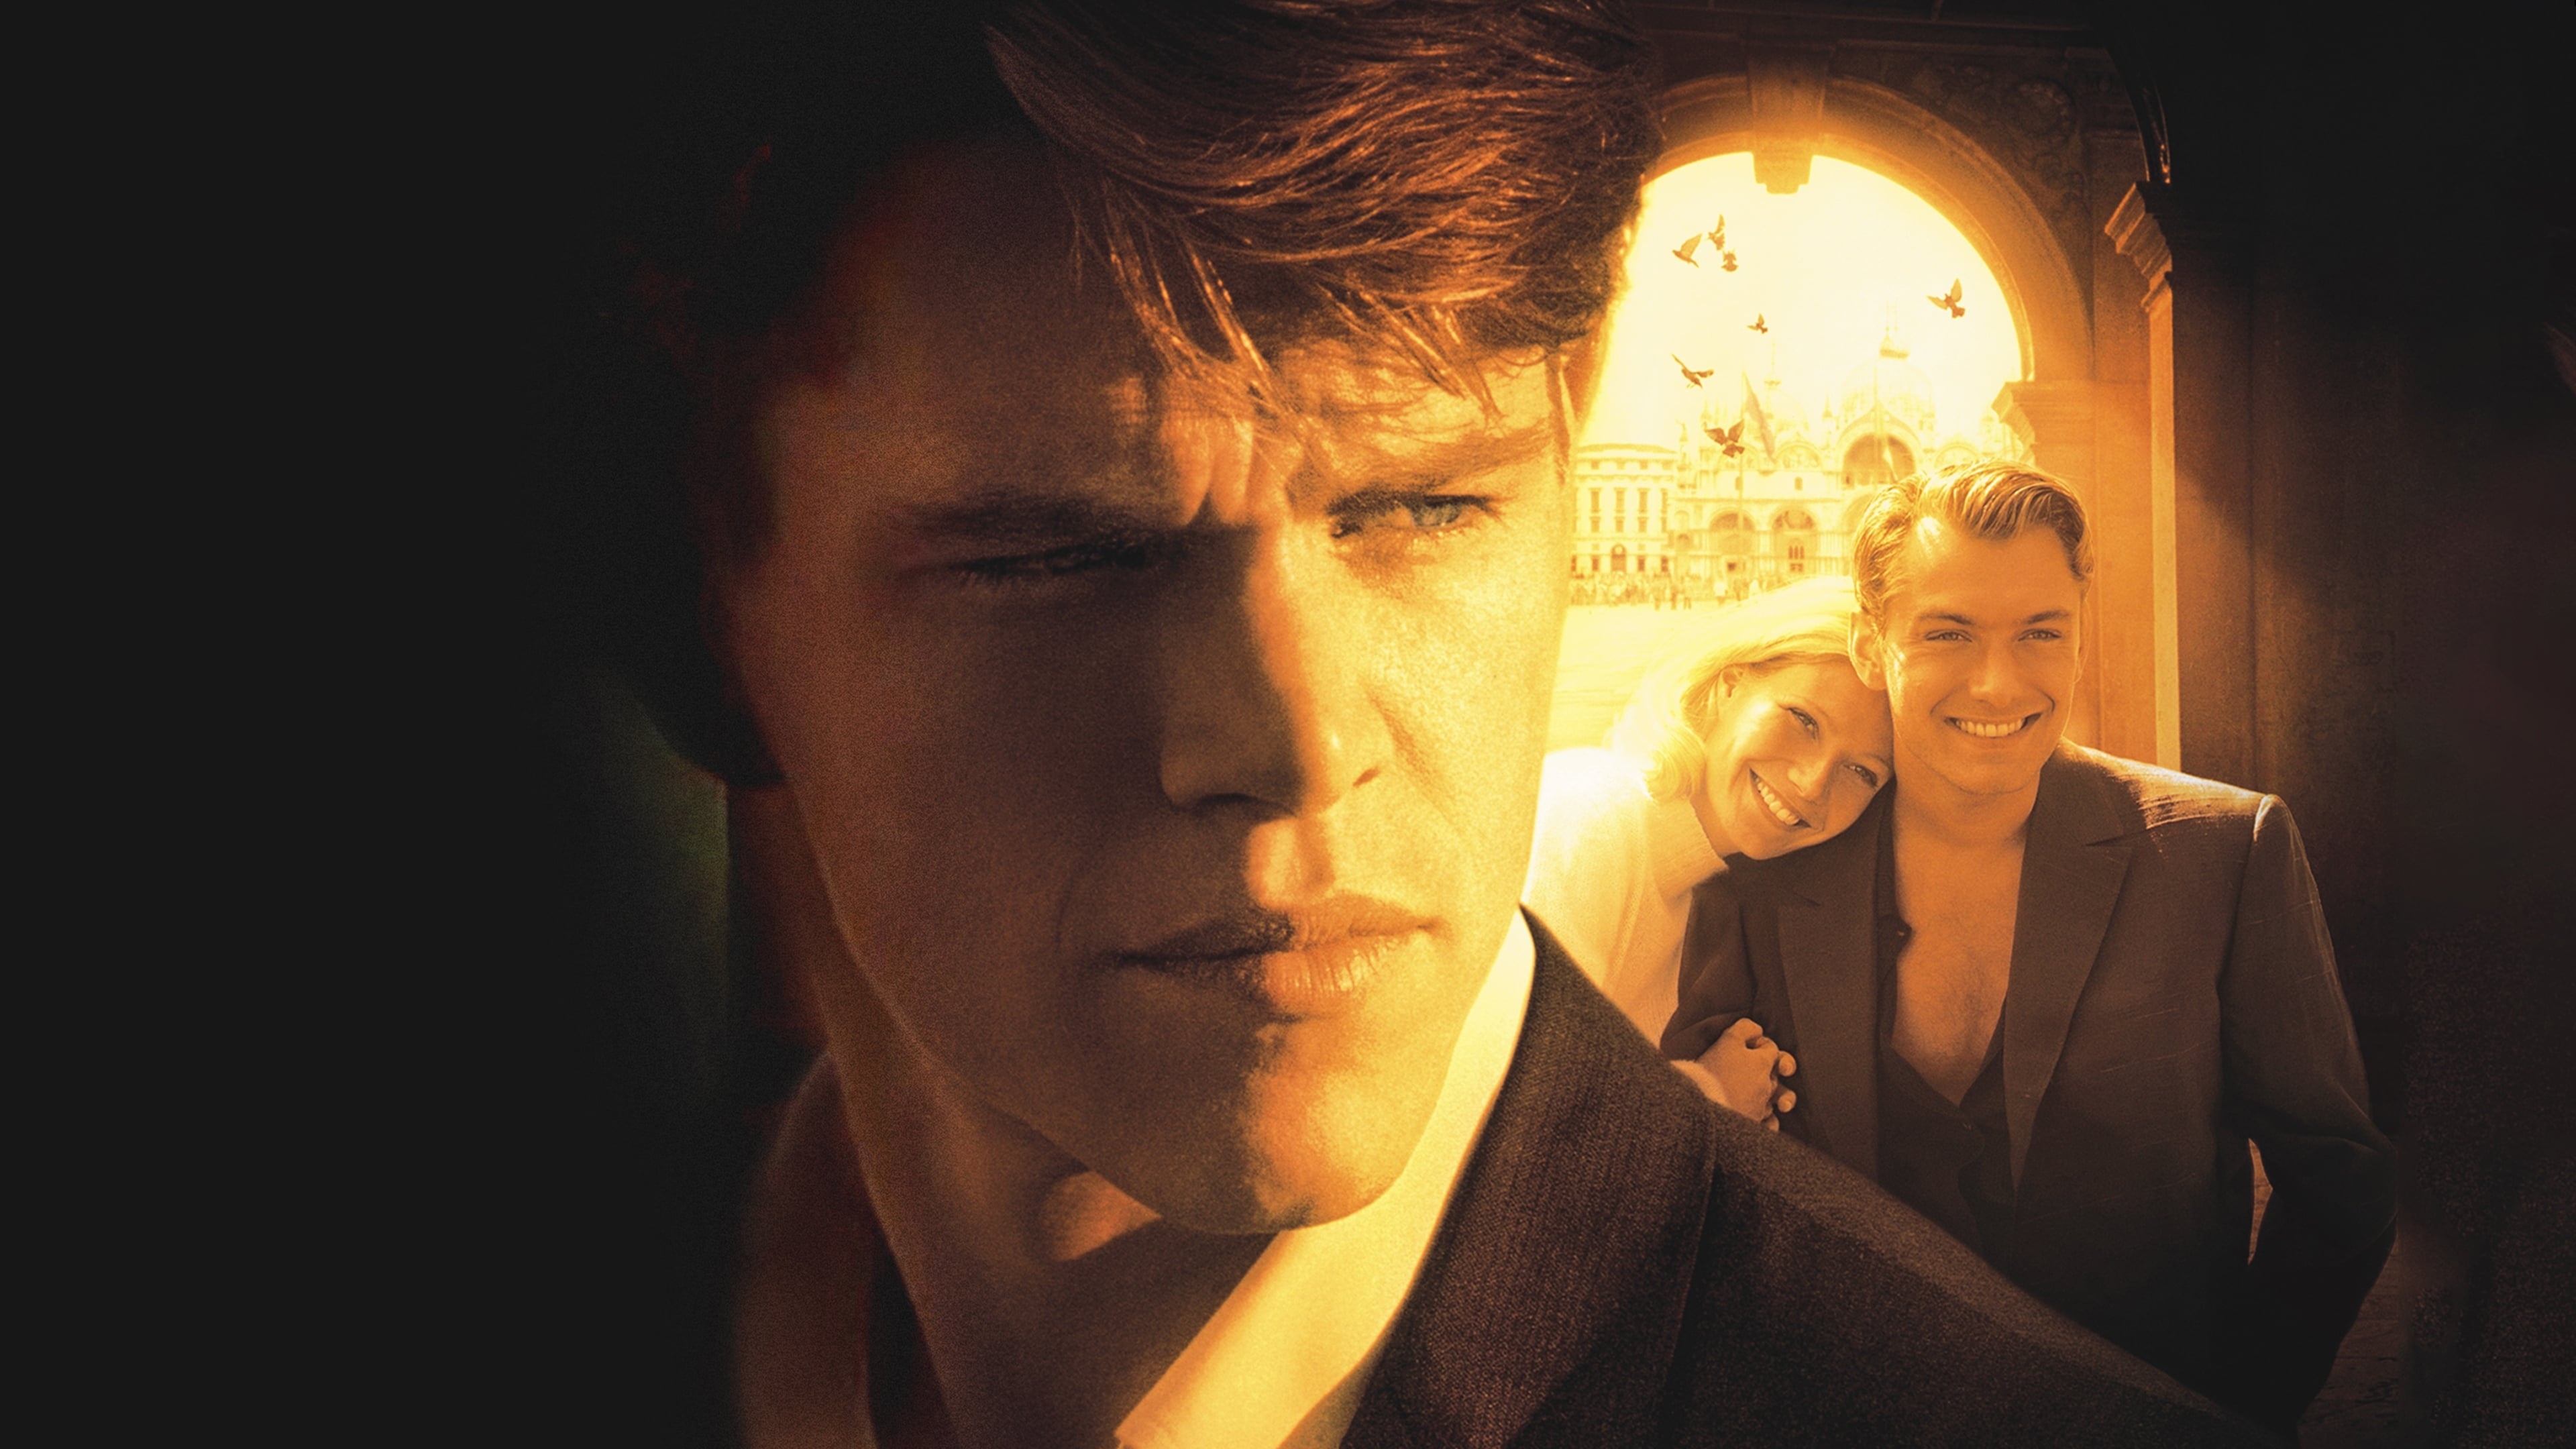 Enigmatic protagonist, Atmospheric setting, Mysterious identity, The Talented Mr. Ripley, 3840x2160 4K Desktop